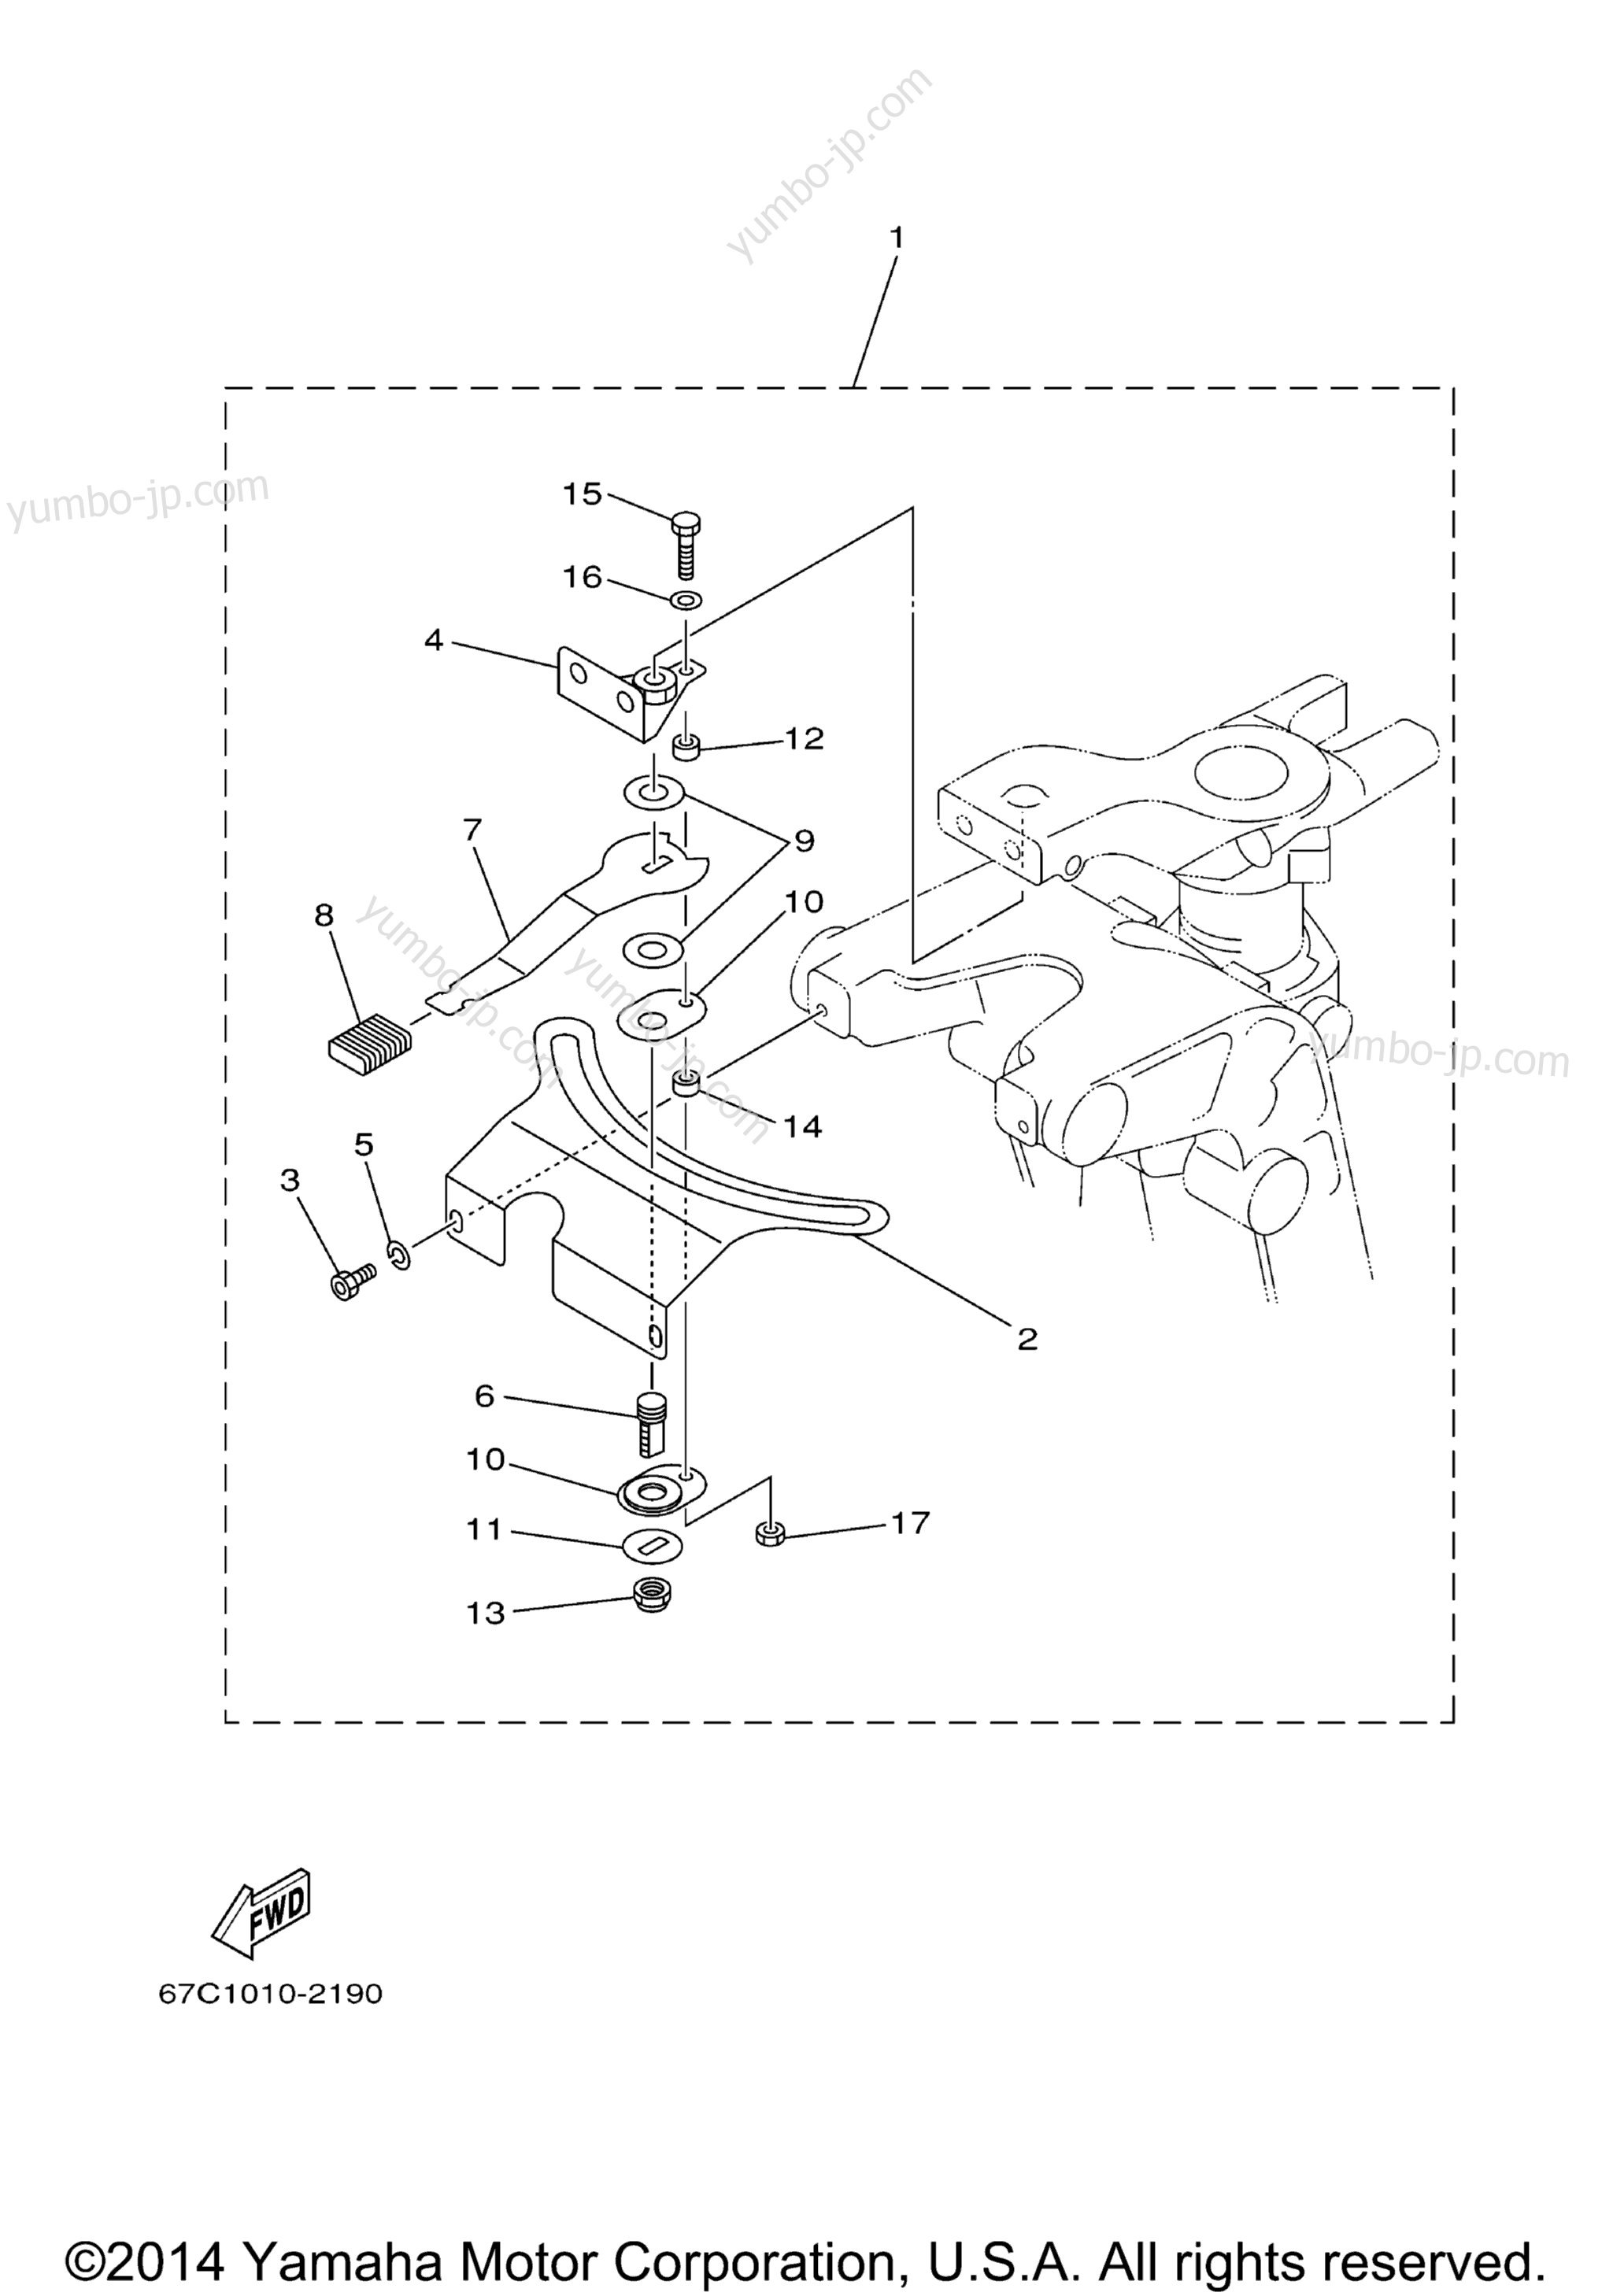 Steering Friction for outboards YAMAHA F40MSHB_MLHB_MJHB_EJRB_ESRB_TLRB (F30TLRB) 2003 year